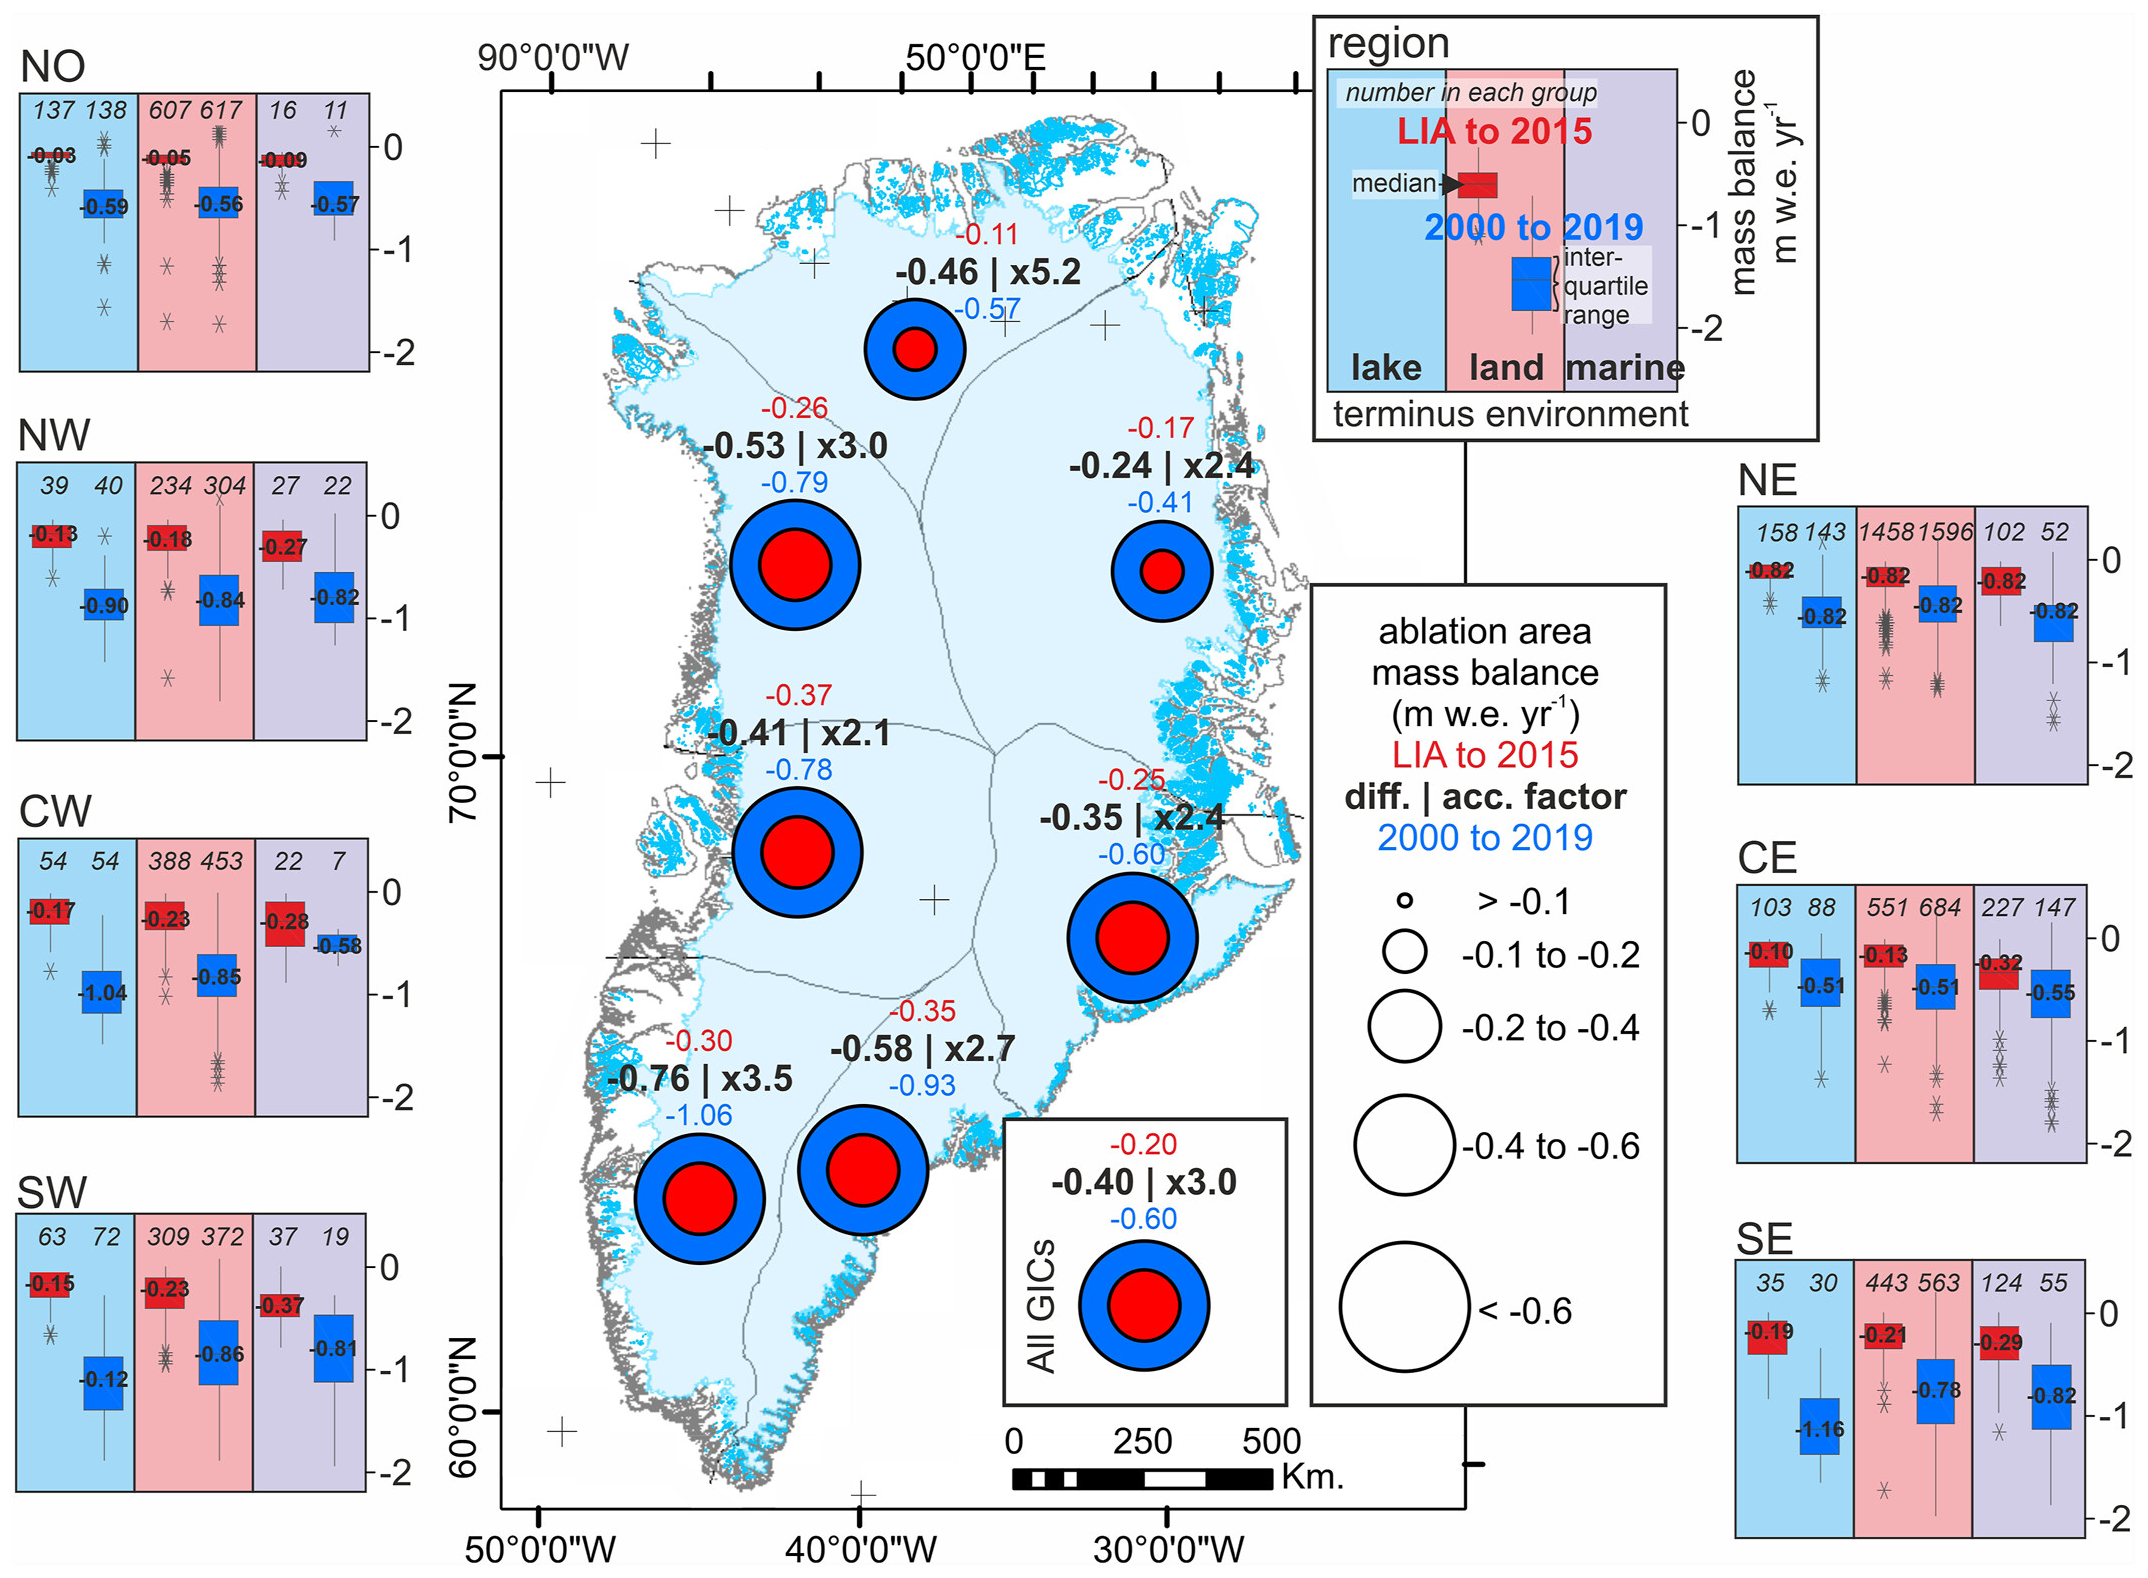 Comparison of long-term rates of glaciers and ice cap mass balance in glacier ablation areas since the Little Ice Age termination 1900 to 2015 (red) with short-term rates between 2000 and 2019 (blue), the latter using the data set of Hugonnet et al. (2021). Boxplots illustrate the control of terminus environment on longer- and shorter-term mass balance in glacier ablation areas. Graphic: Carrivick, et al., 2023 / Geophysical Research Letters 
